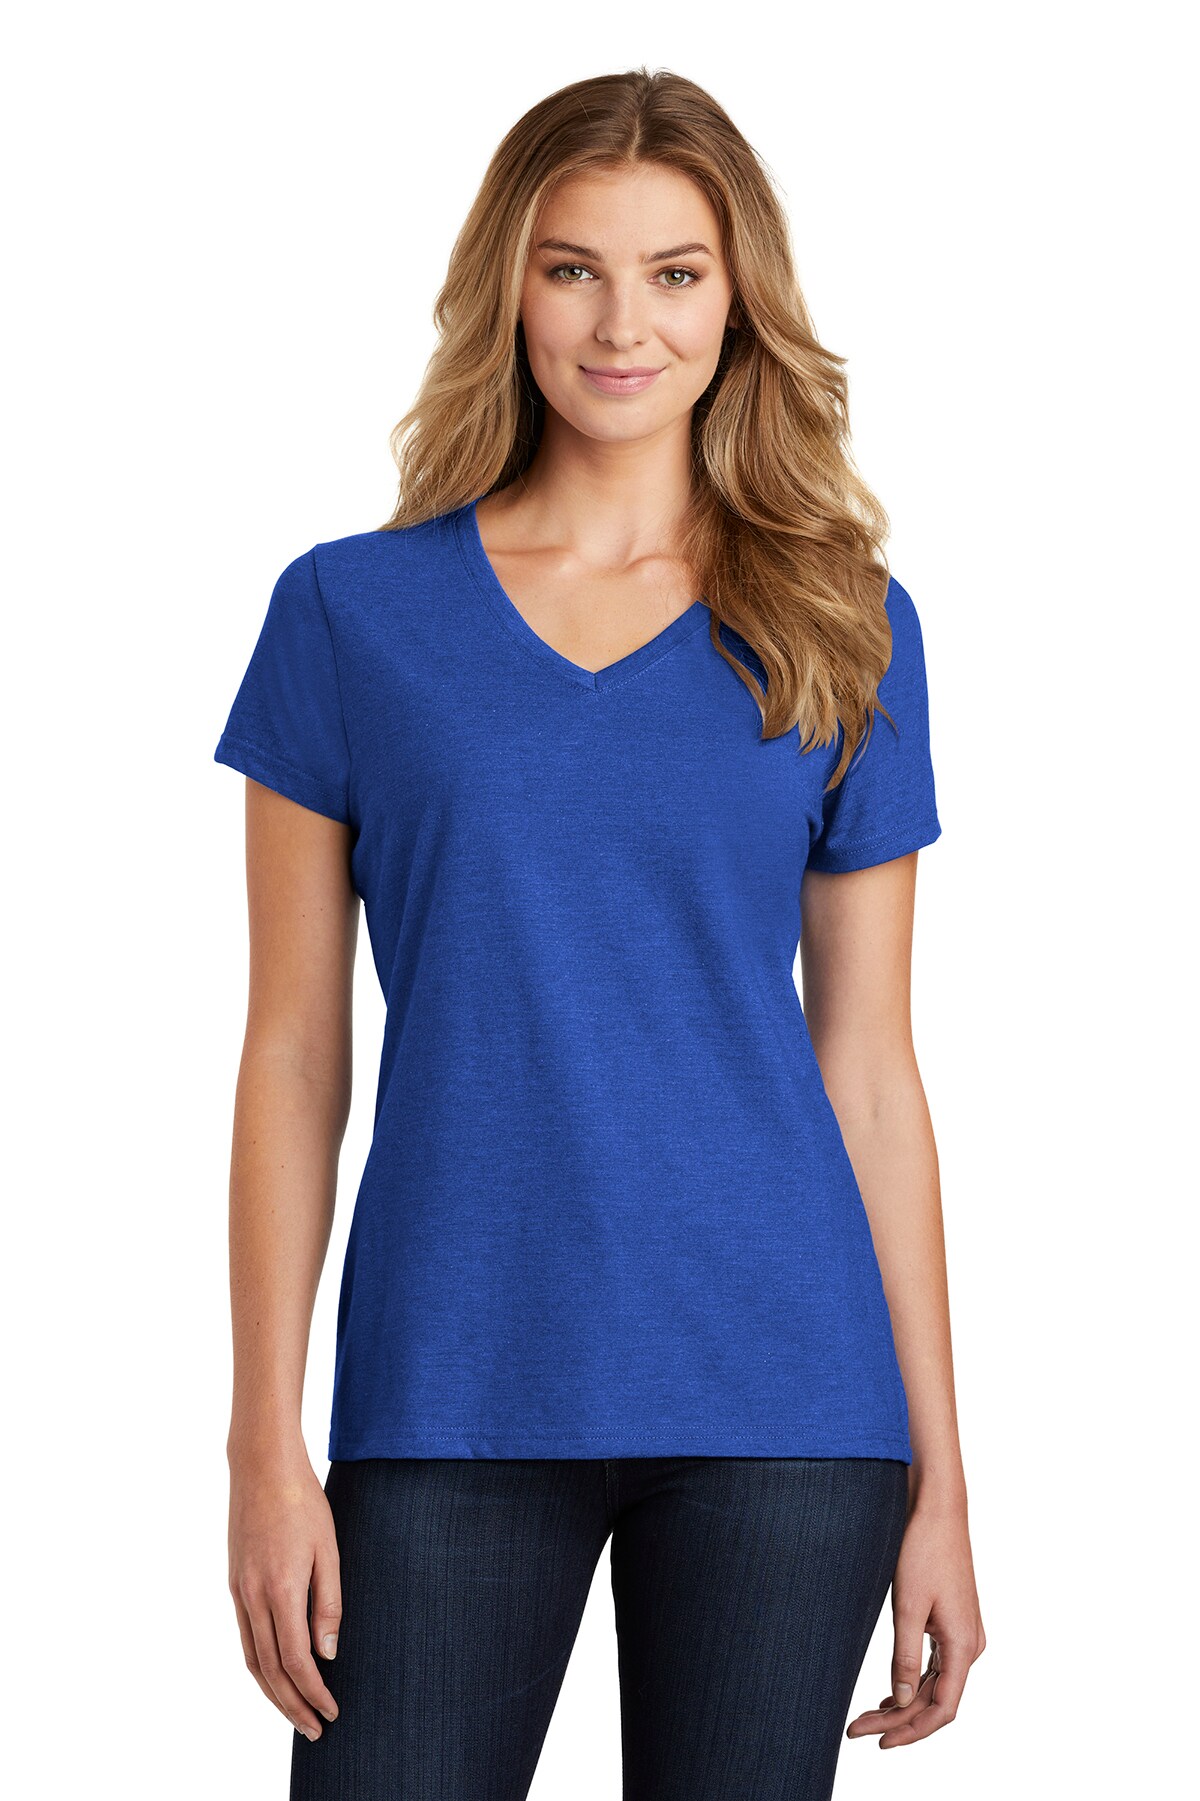 Luxurious Blend V-Neck Tee For Women, 4.5-ounce, 60/40 ring spun  cotton/poly Short Sleeve Shirt, Sculpted for Style Master Effortless  Elegance in Our Blend V-Neck T-shirt Series, RADYAN®